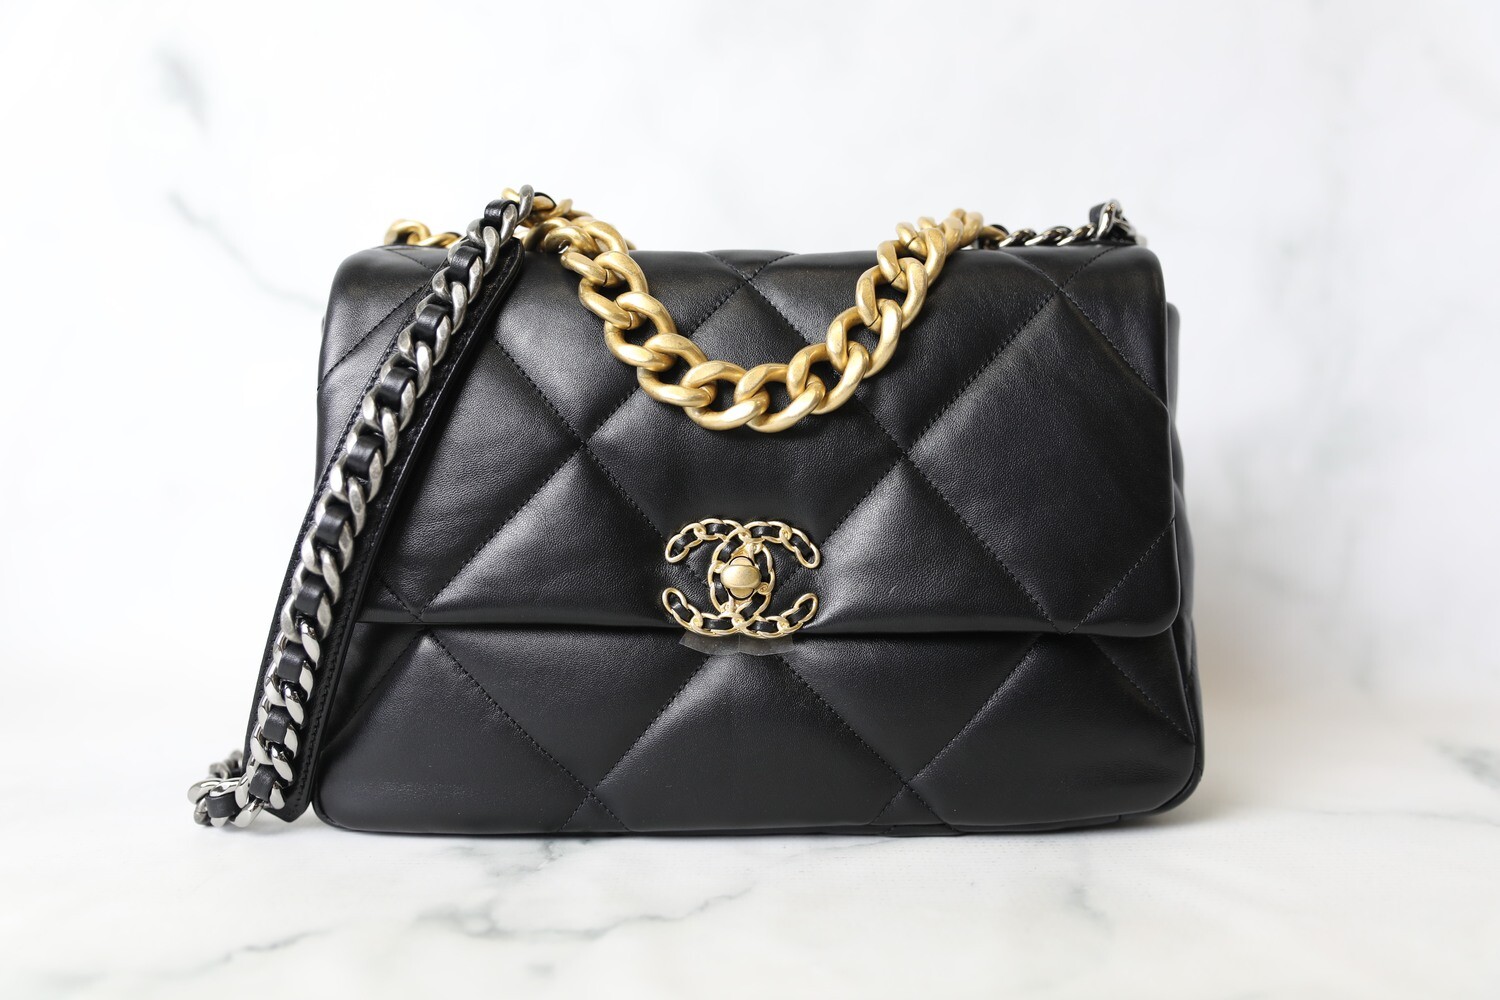 Chanel 19 Large, Black Leather, New in Box - Julia Rose Boston